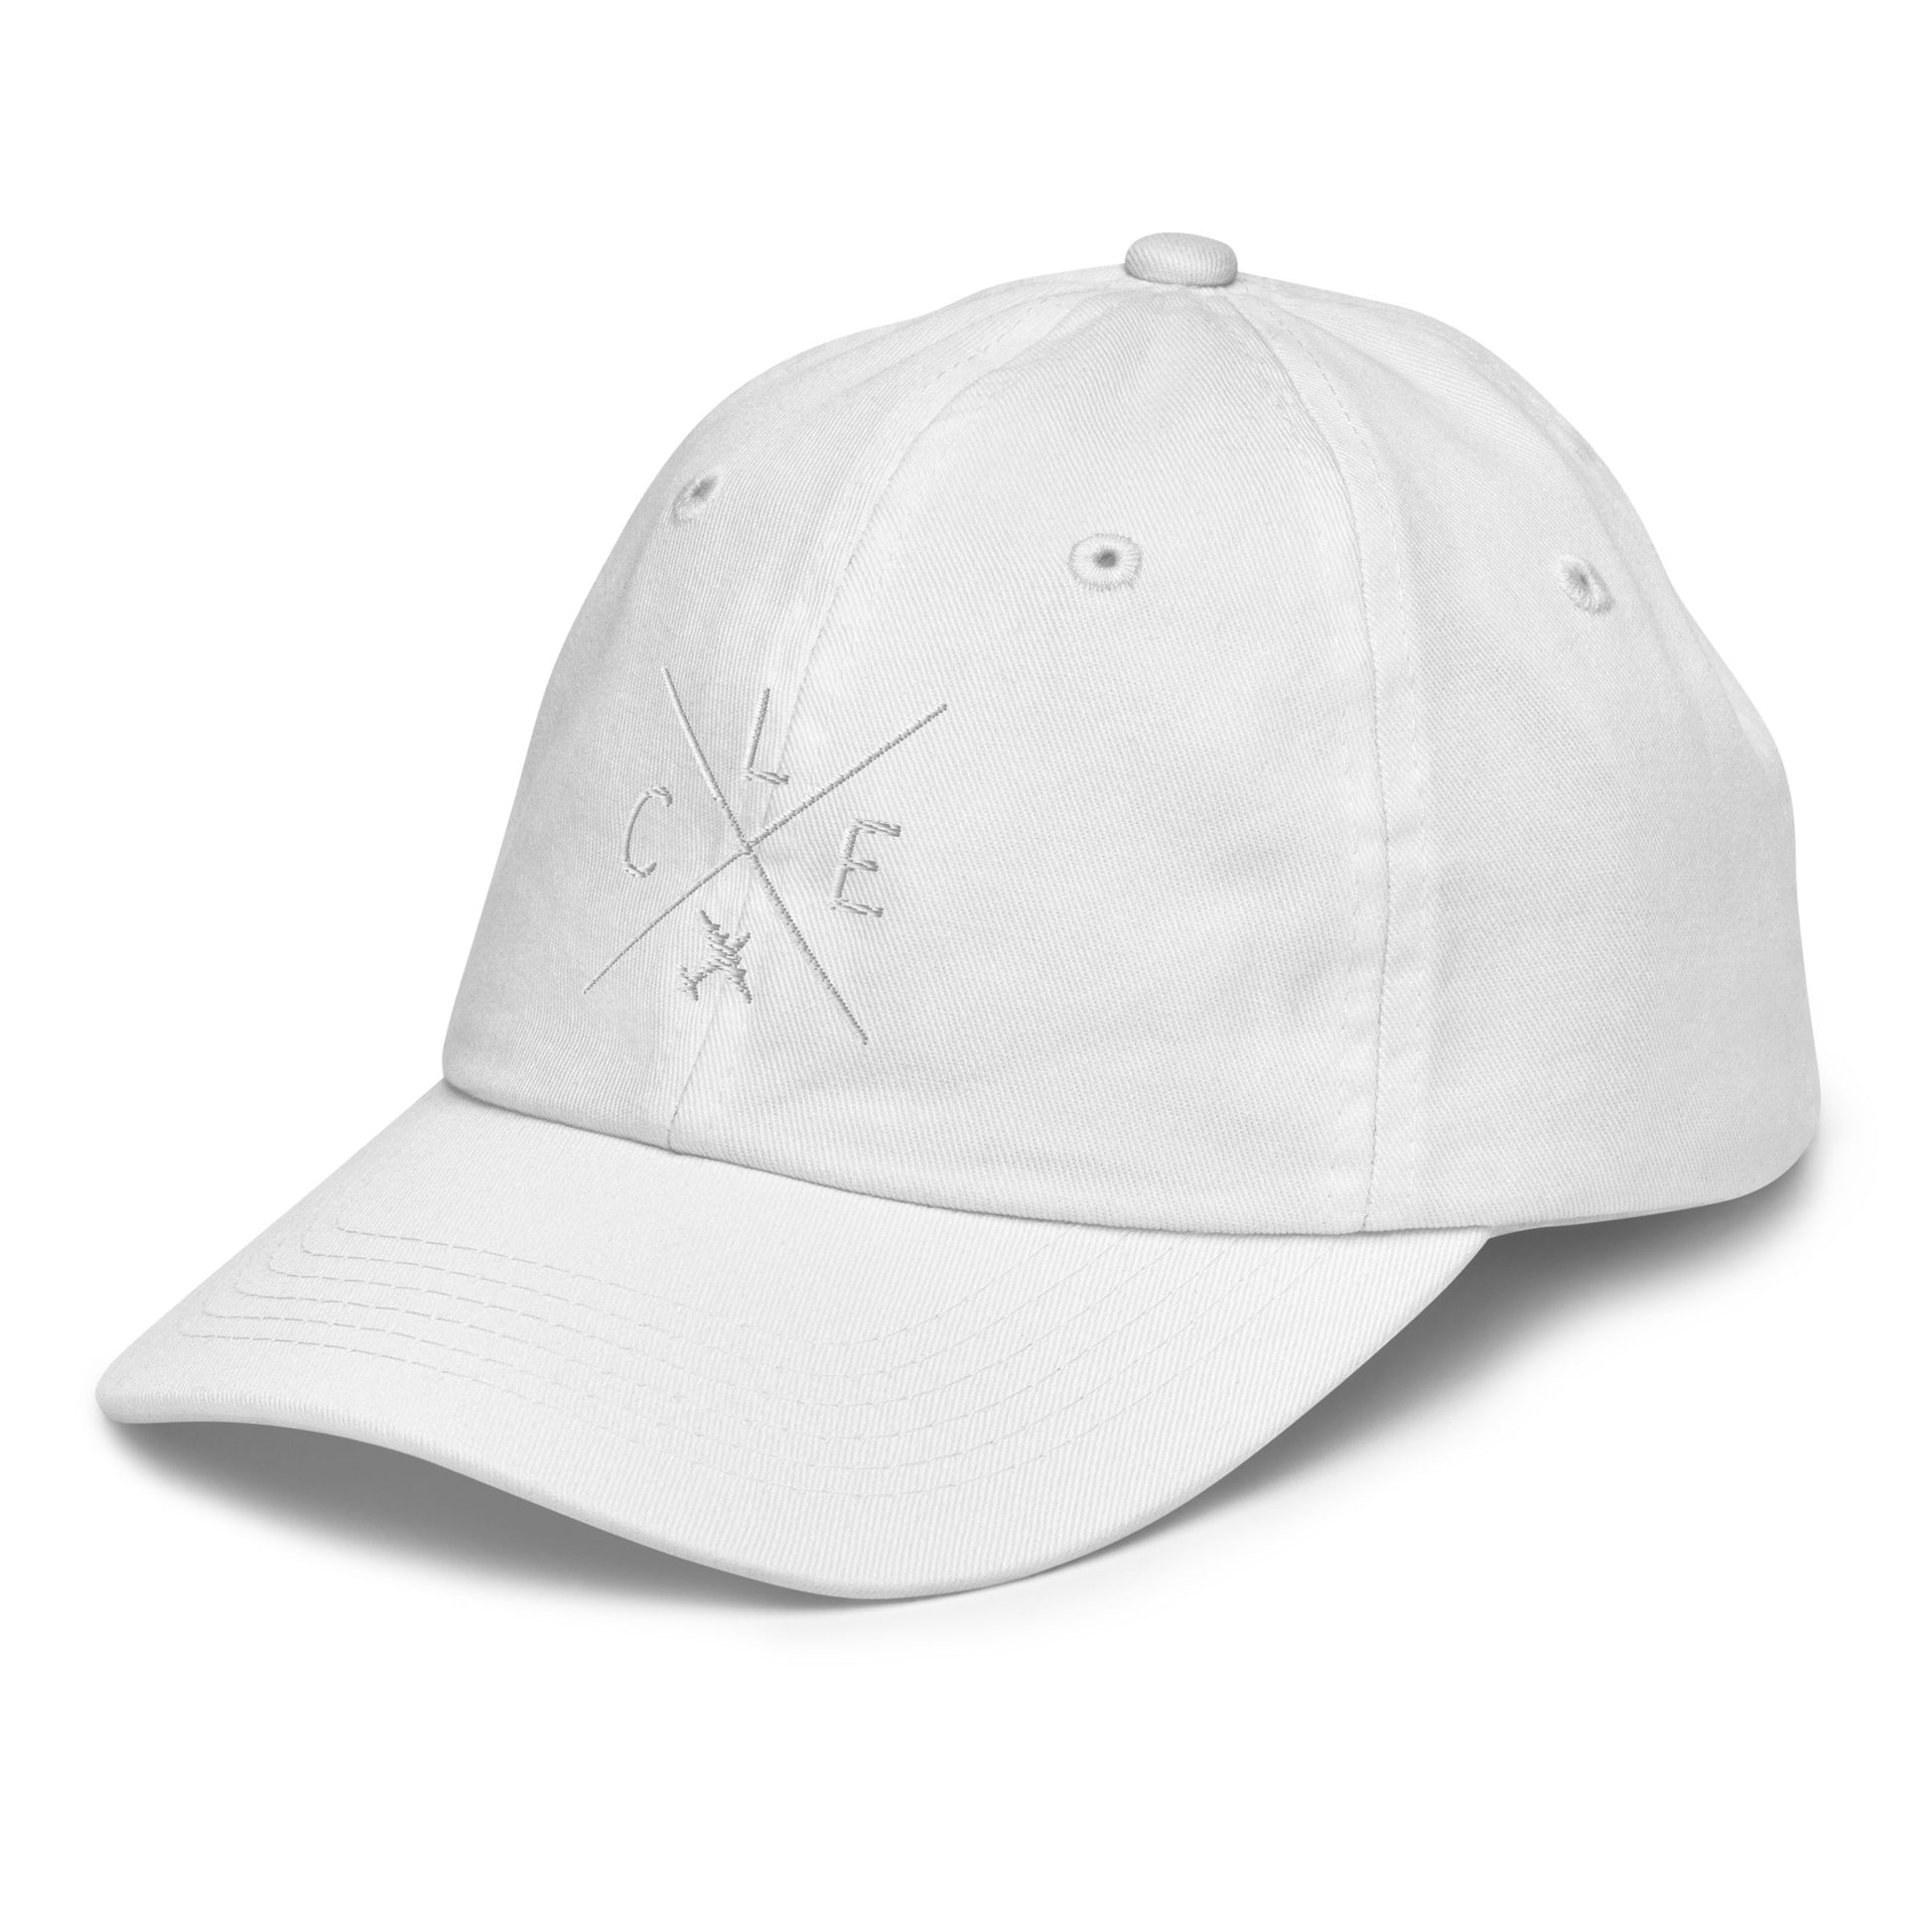 Crossed-X Kid's Baseball Cap - White • CLE Cleveland • YHM Designs - Image 36